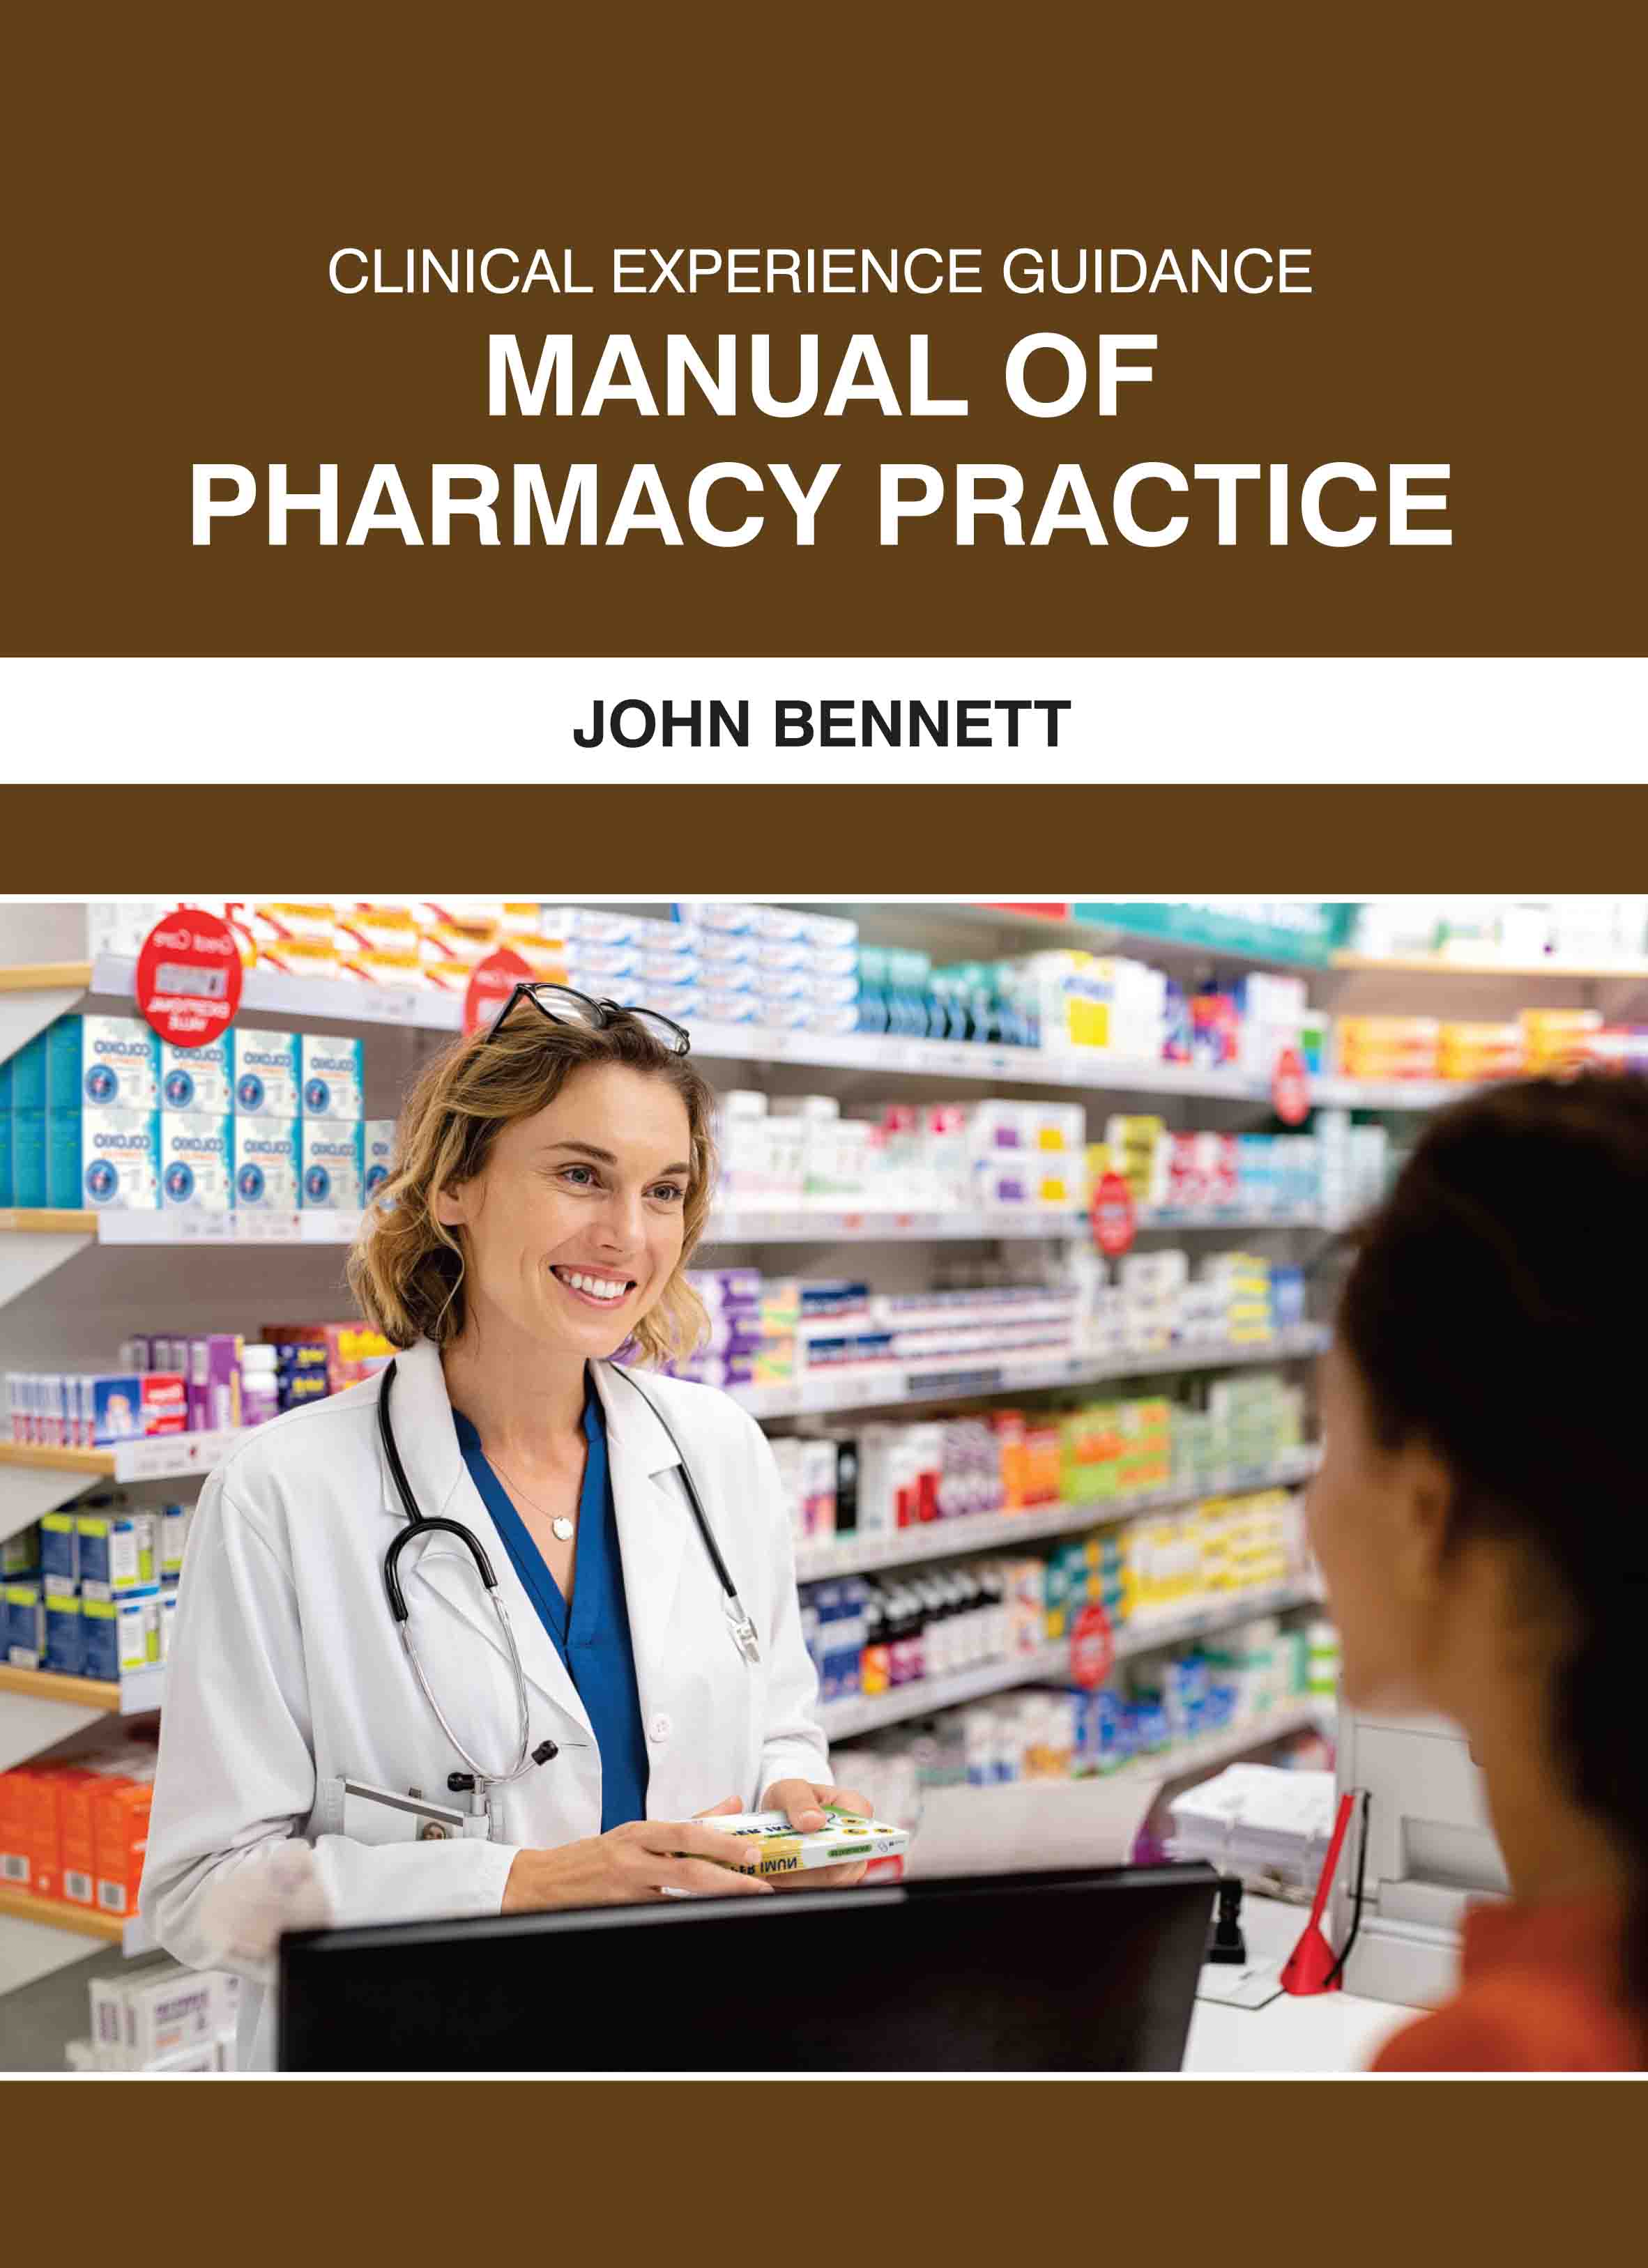 Clinical Experience Guidance: Manual of Pharmacy Practice